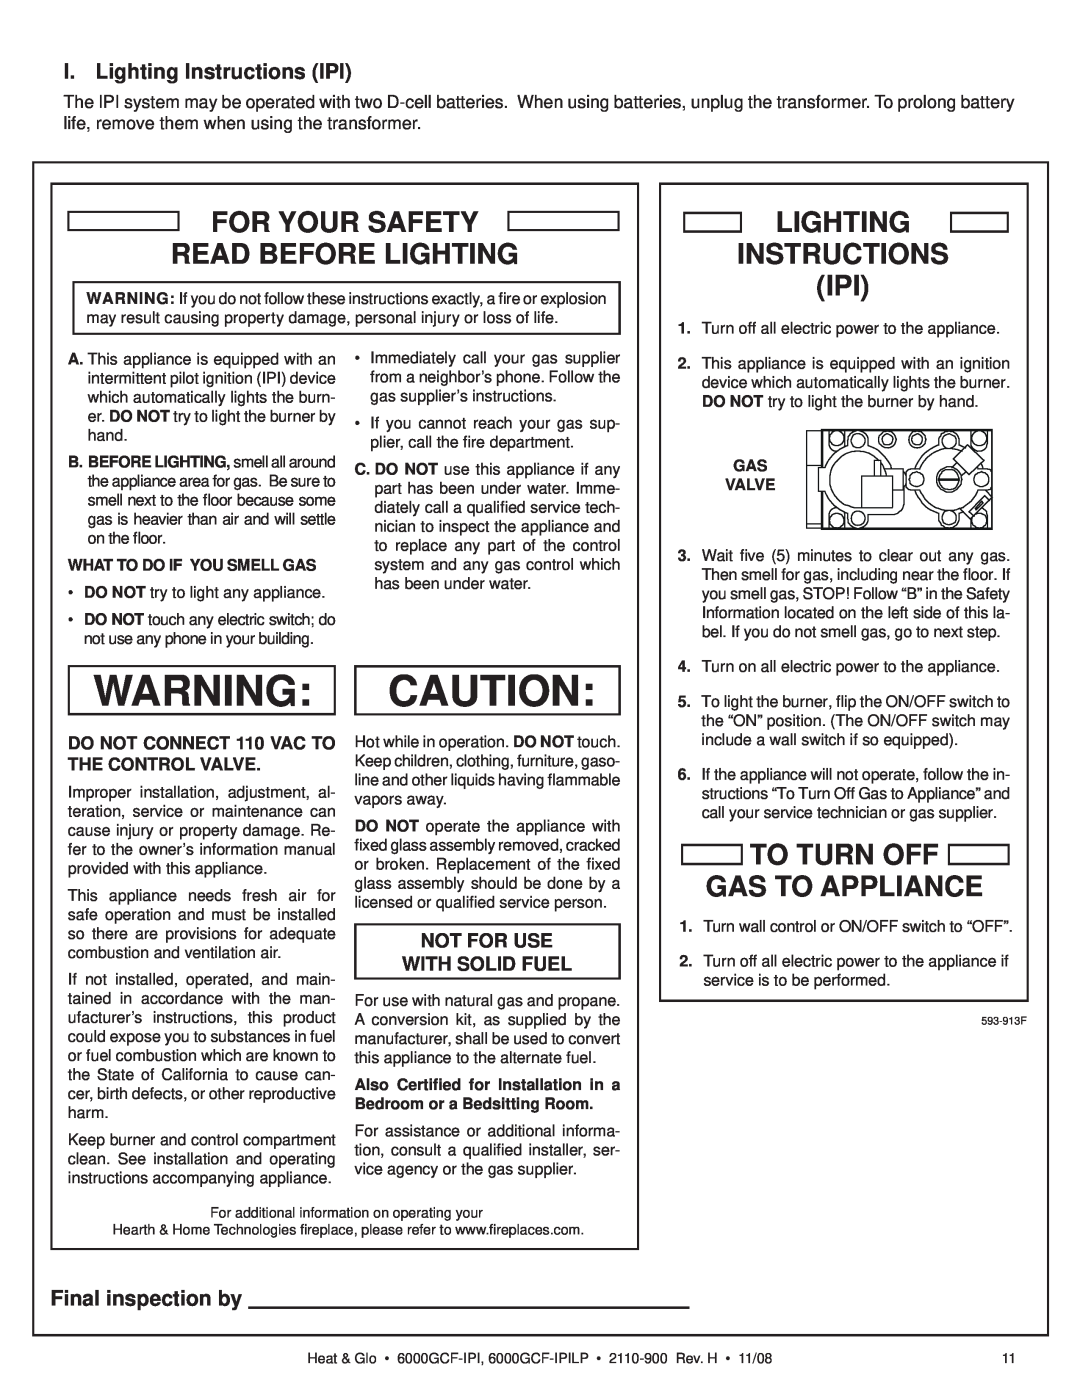 Hearth and Home Technologies 6000GCF-IPI For Your Safety Read Before Lighting, Lighting Instructions Ipi, Warning Caution 